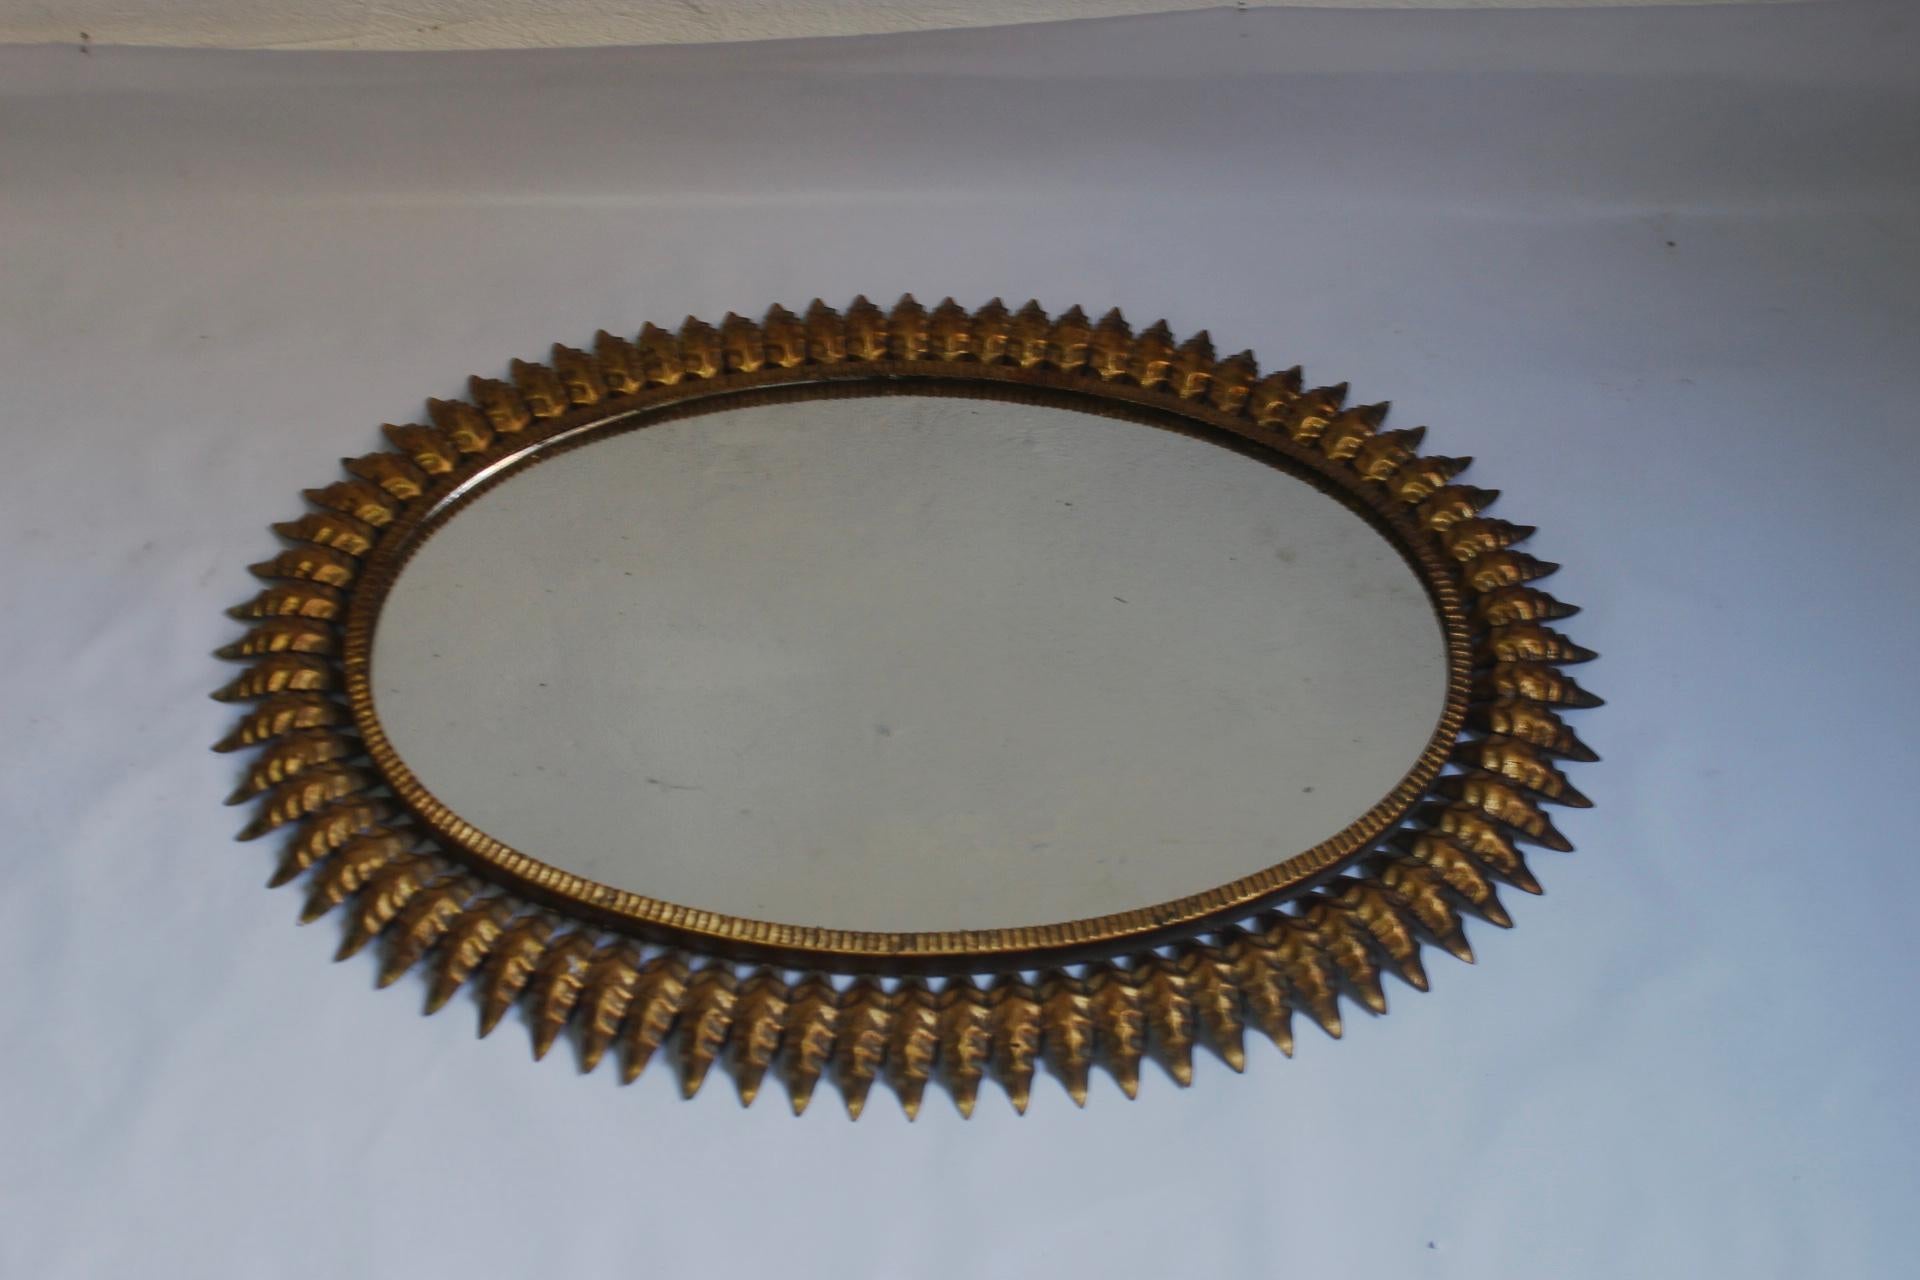 Midcentury large oval sunburst or floral mirror, made in Spain during the 1950s.